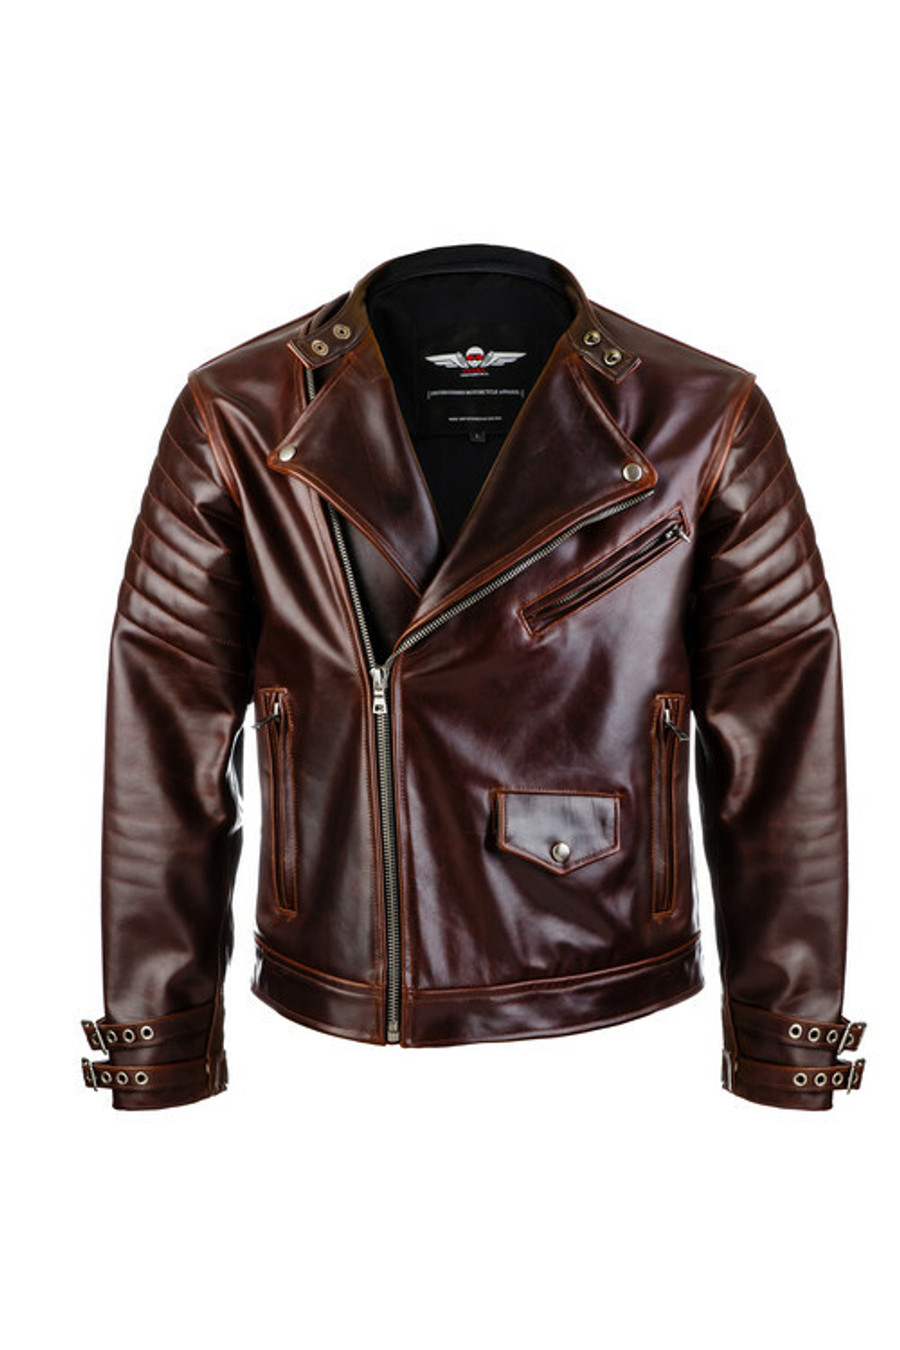 the vktre moto co vktre 1 motorcycle jacket made in the USA